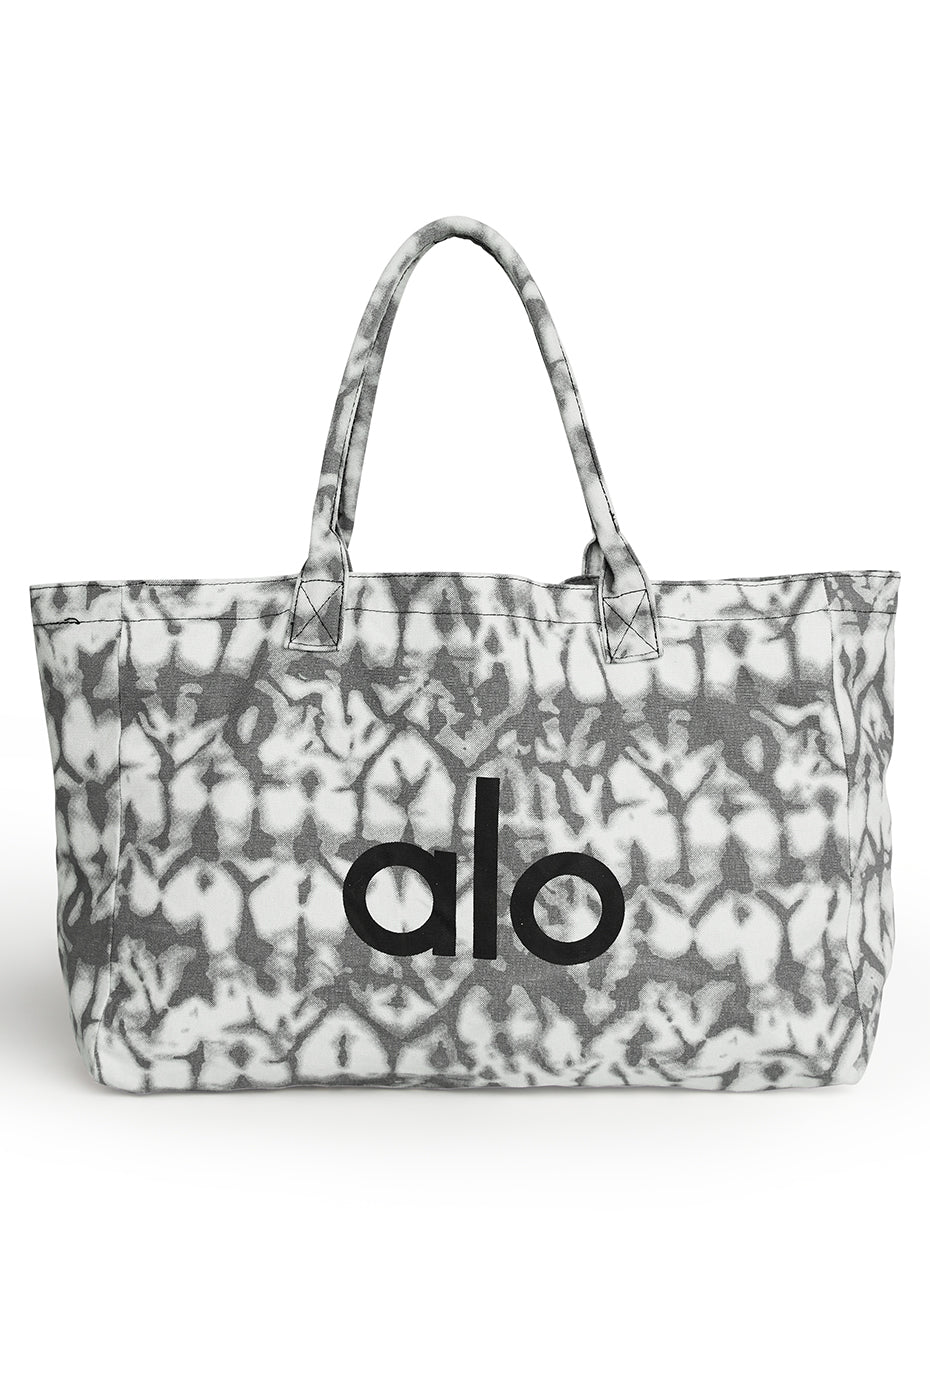 alo yoga Small Gray Paper Shopping Gift Bag with White Strap Handles 8 x 10  x 4